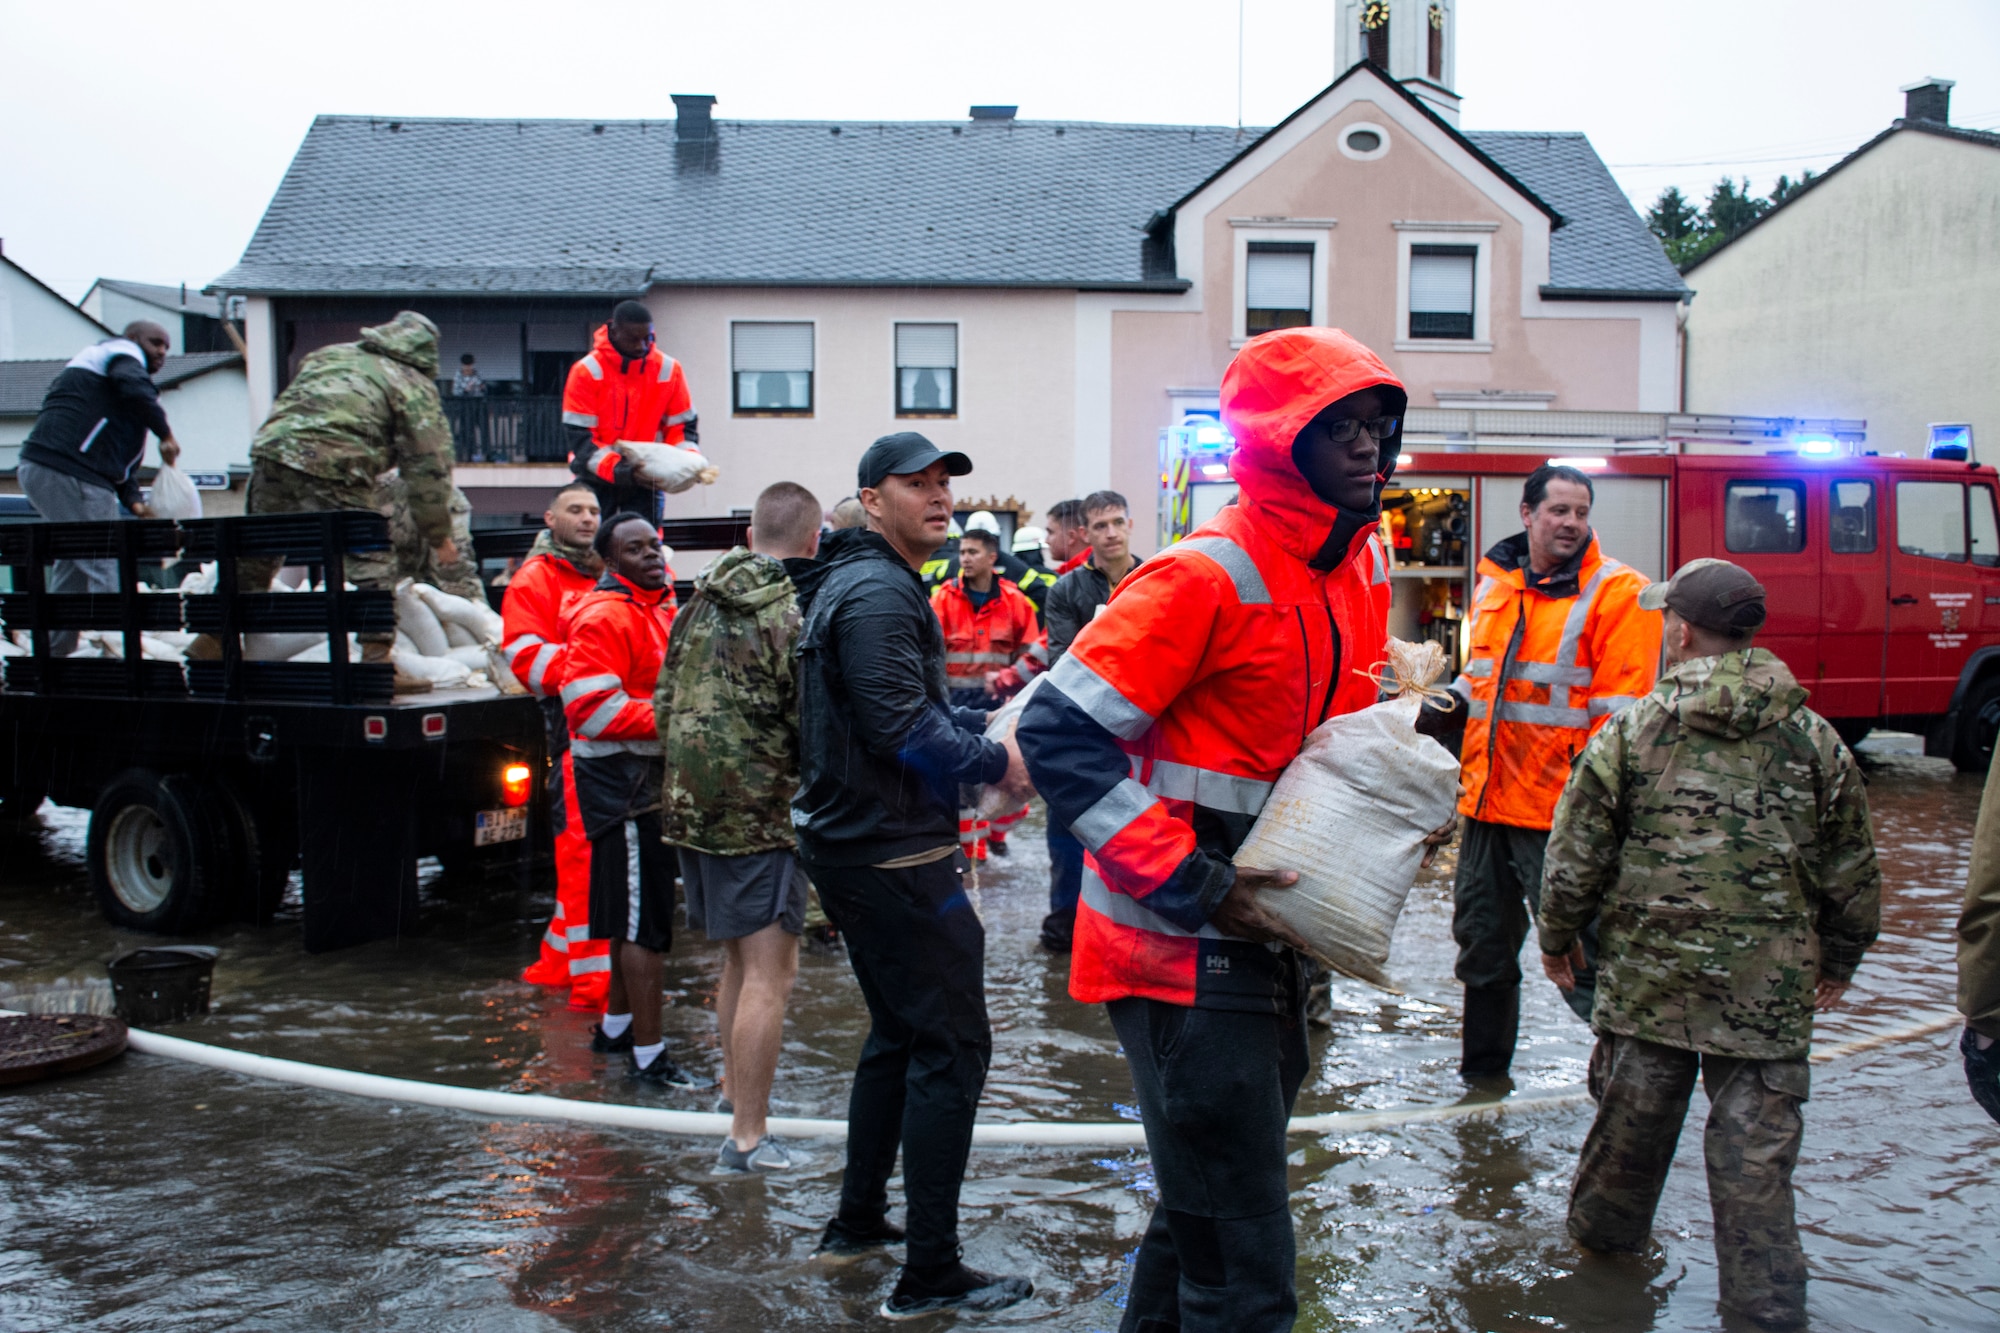 Members from the 52nd Civil Engineer Squadron from Spangdahlem Air Base, Germany, work with German first responders and community members to deliver sandbags to the town of Binsfeld, Germany, July 14, 2021.